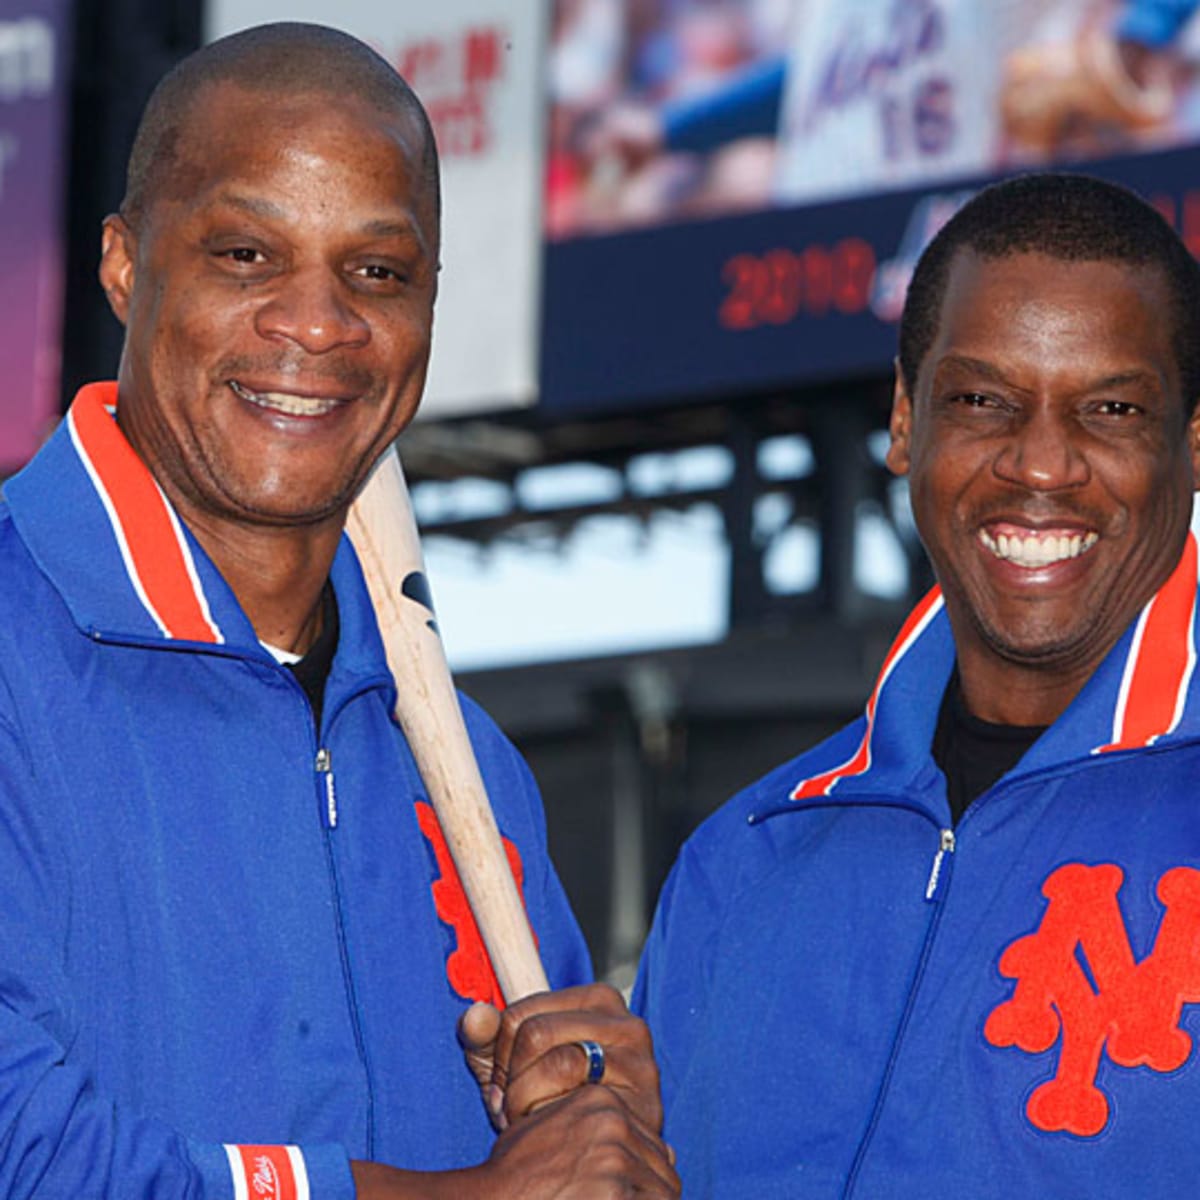 The Mets' Rise And Fall With Doc Gooden And Darryl Strawberry